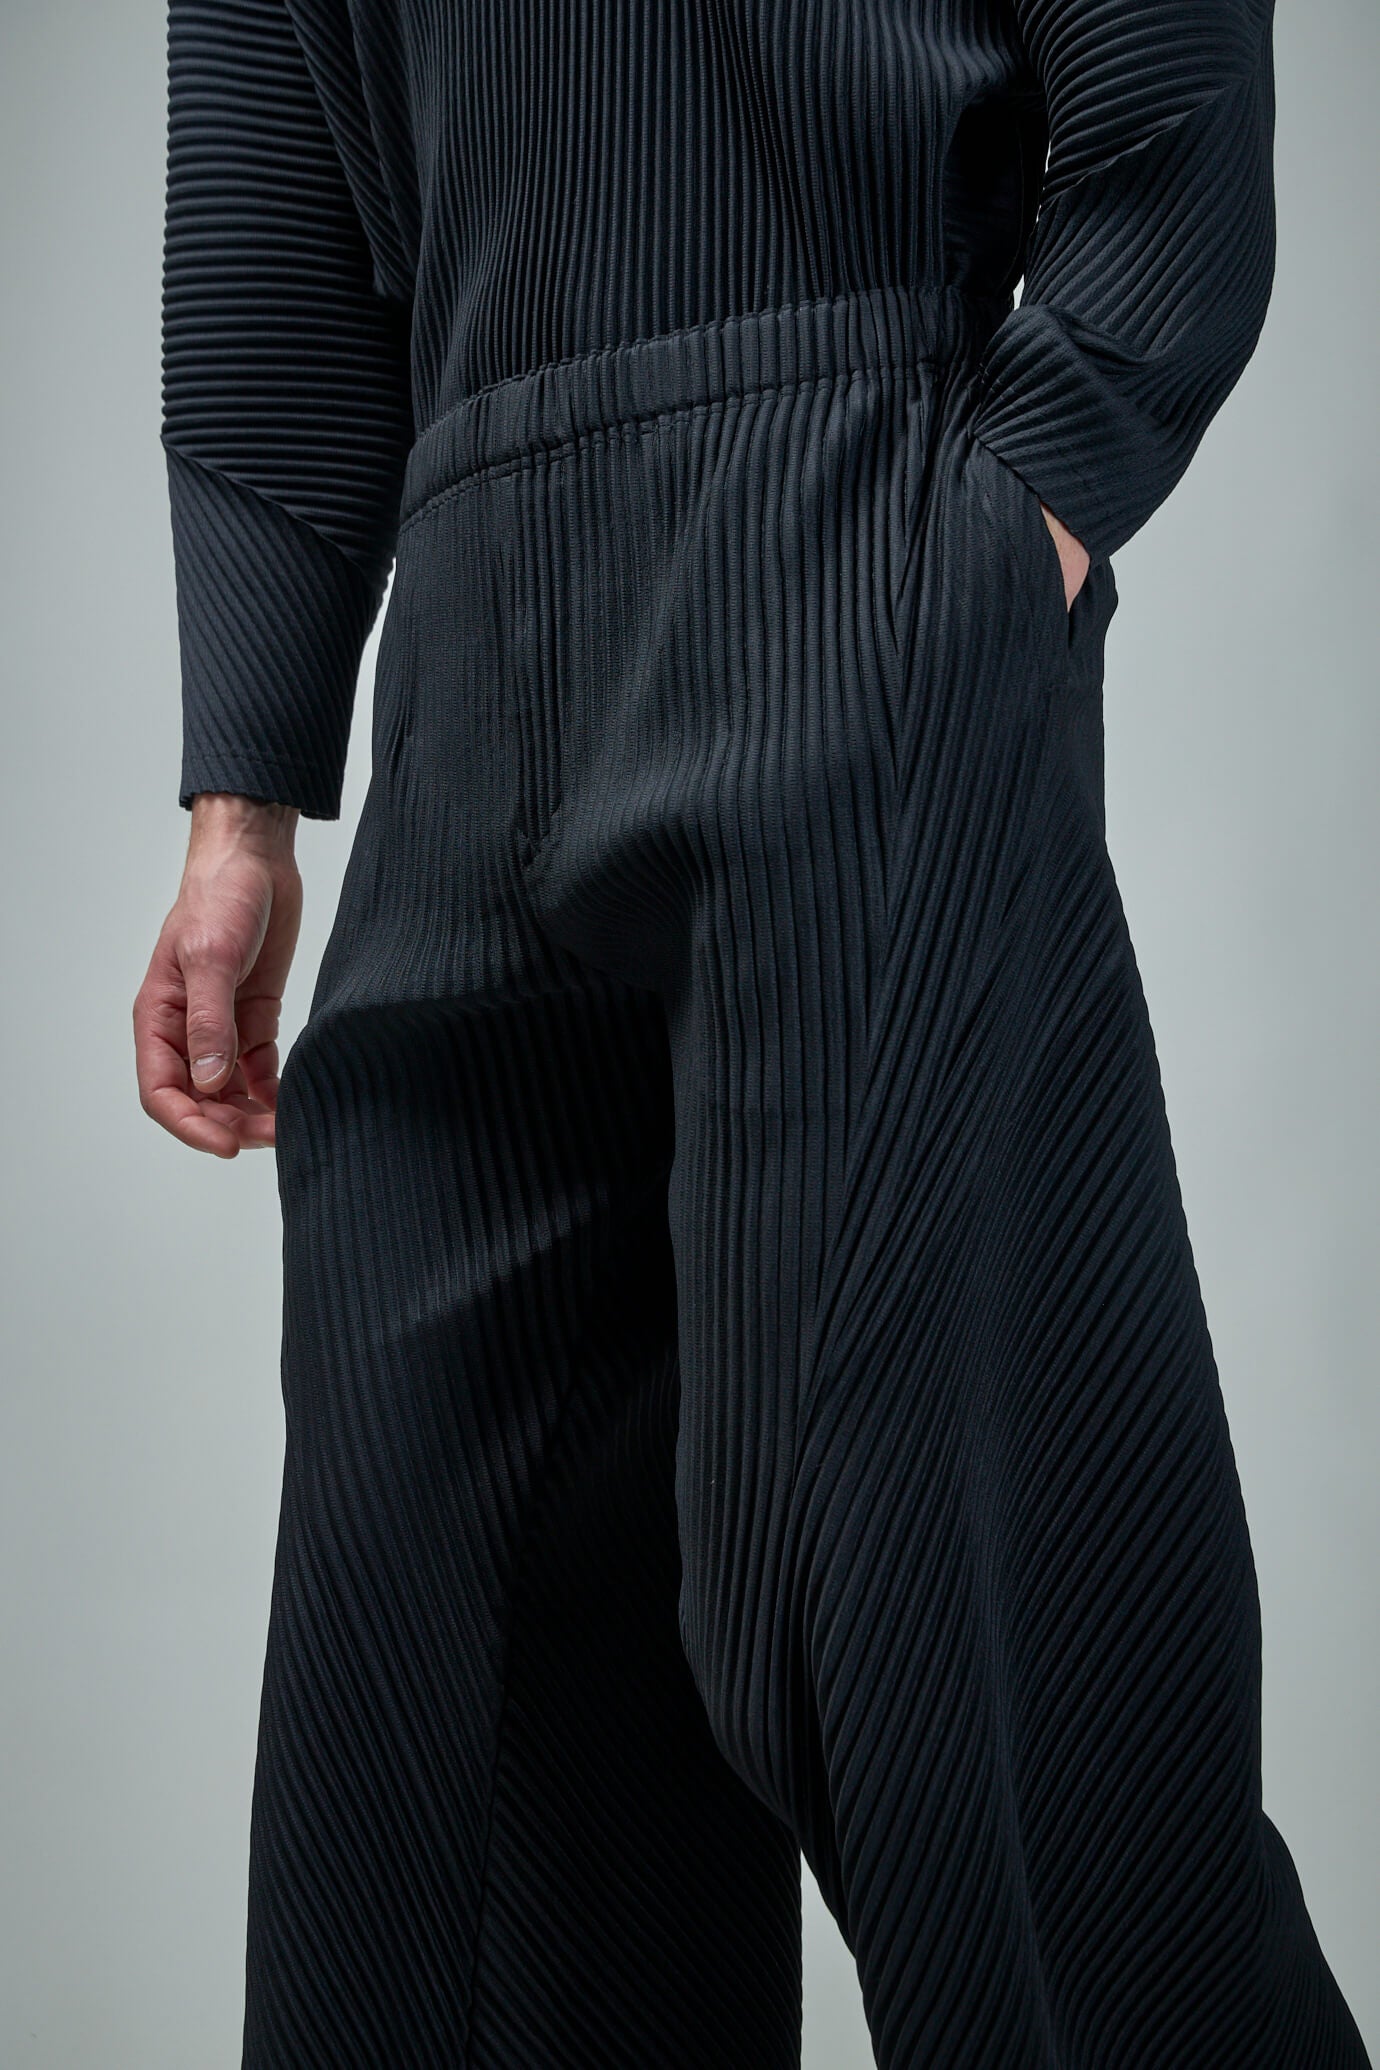 PAUSE Highlights: 12 Ways You Can Style Issey Miyake Pants – PAUSE Online |  Men's Fashion, Street Style, Fashion News & Streetwear